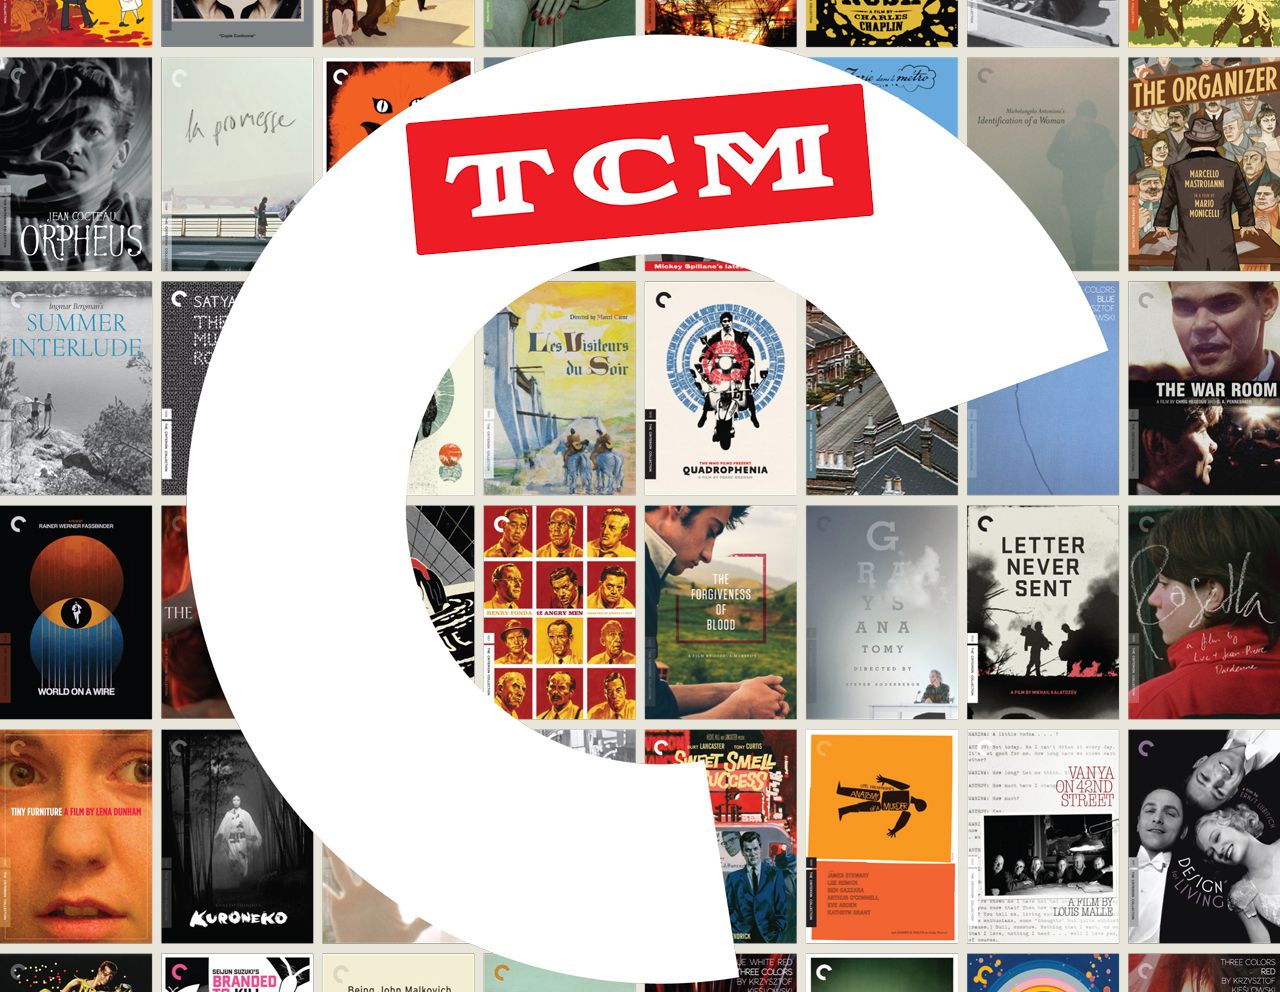 filmstruck is tcm and criterion s new streaming service launching this year image 1